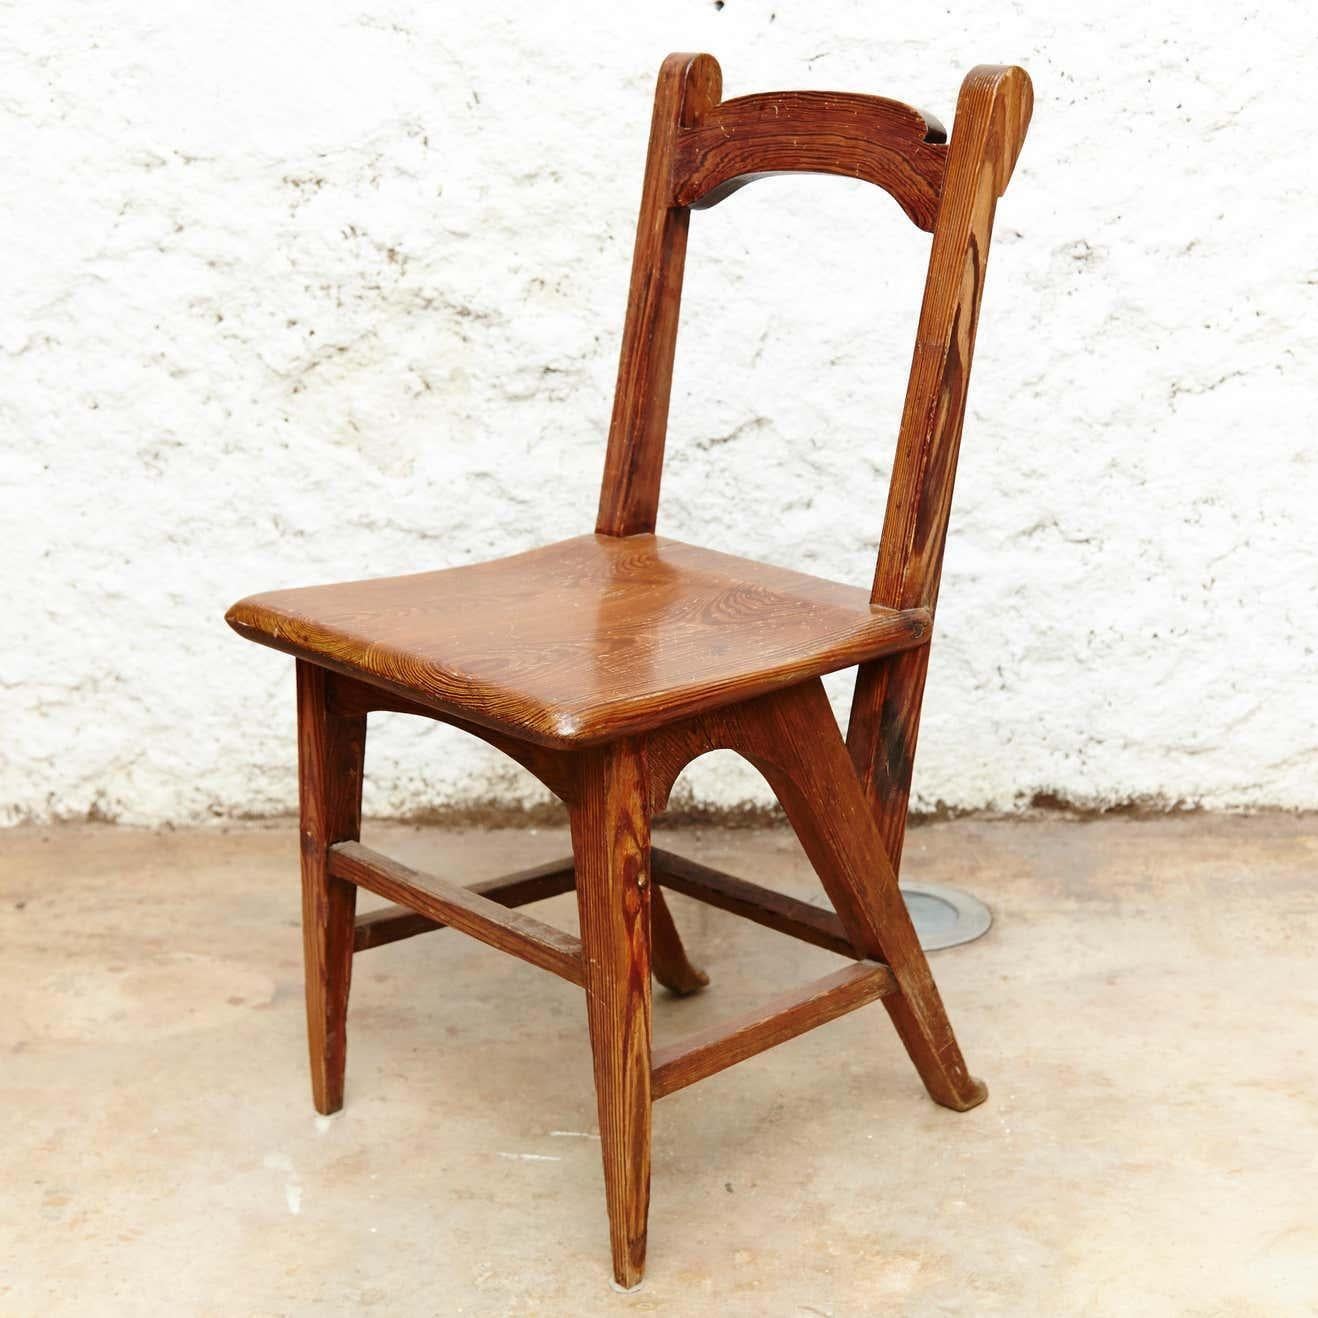 Pair of Catalan Modernist Wooden Chairs, circa 1920 For Sale 6